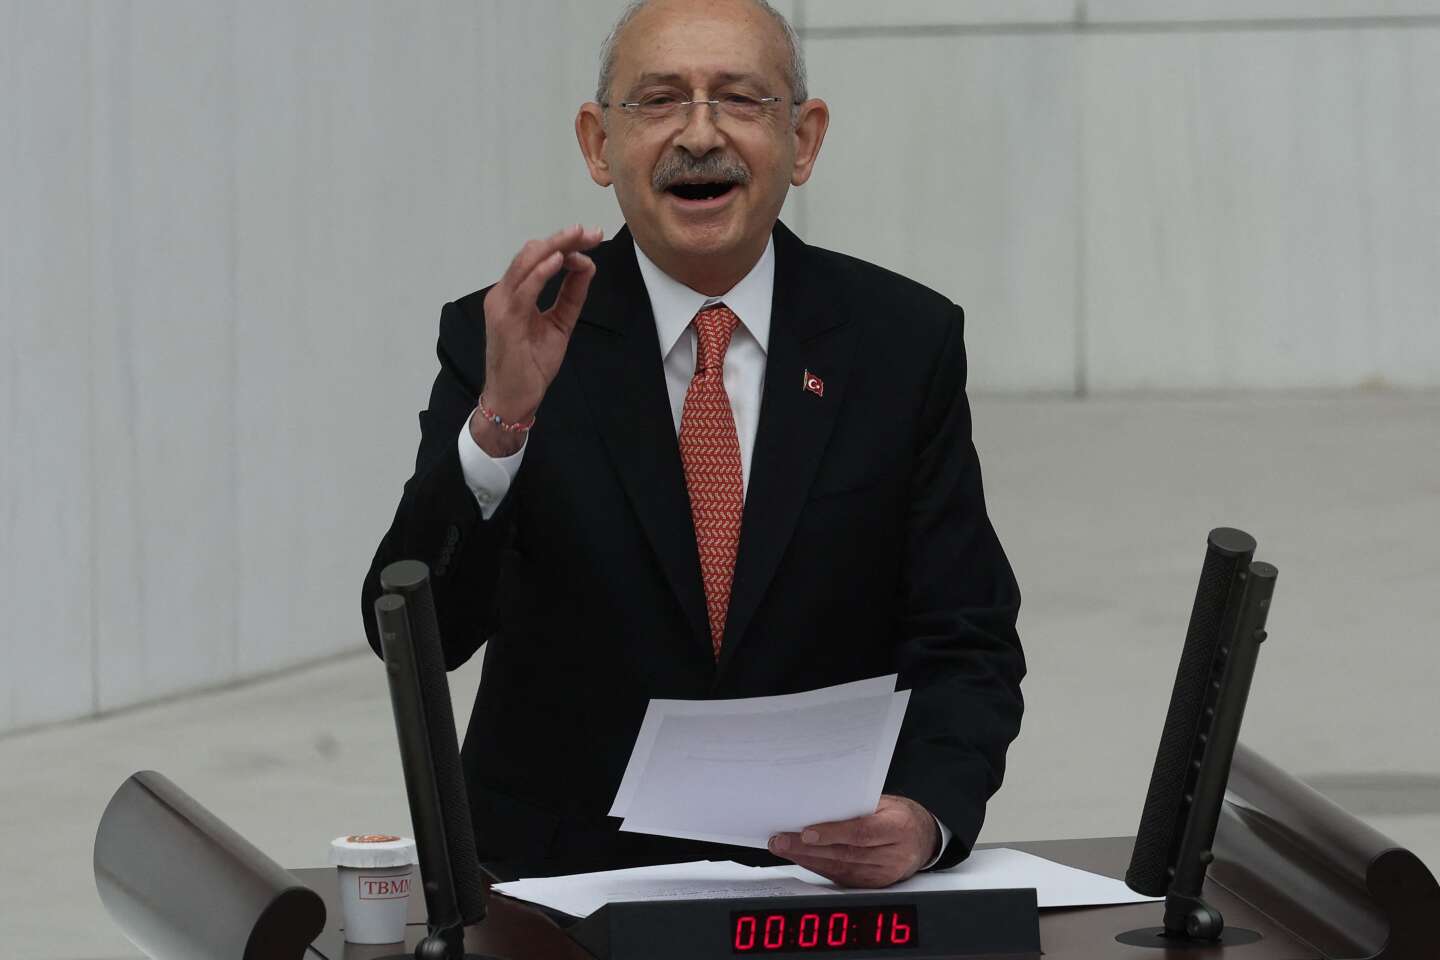 In Turkey, a video has gone viral in which opponent Kemal Kilicdaroglu claims to be of the Alevi faith